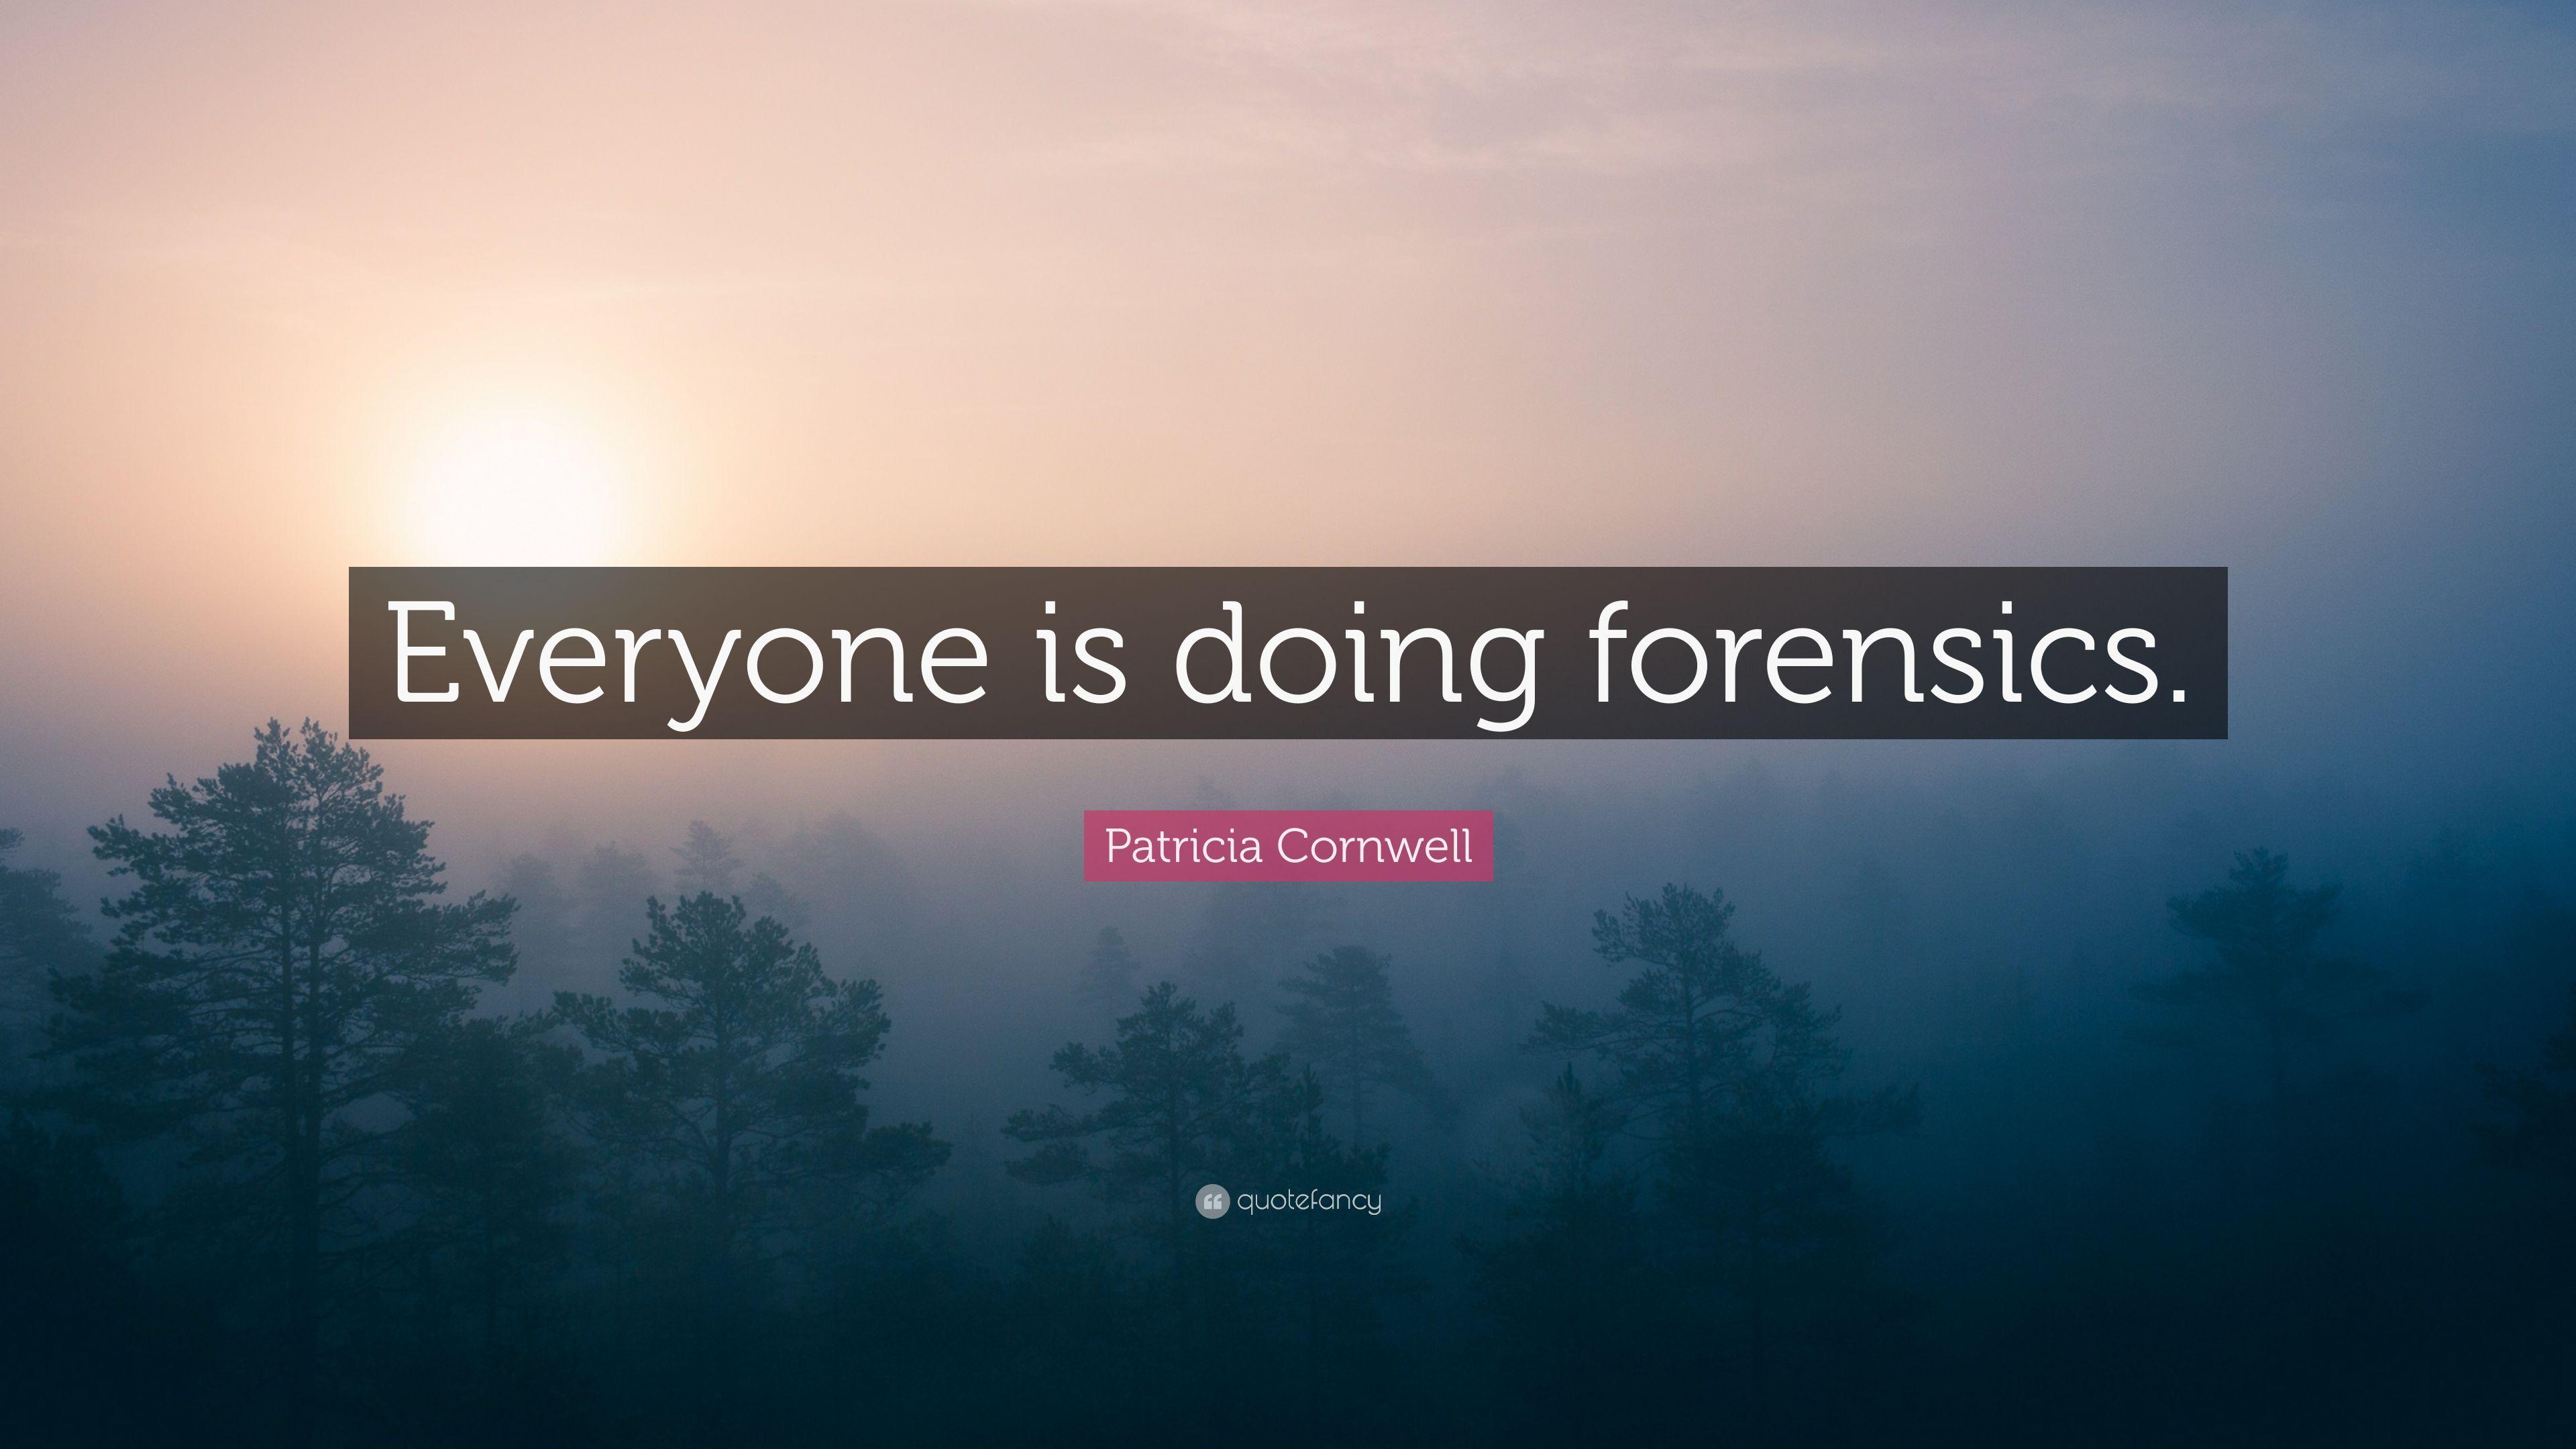 Patricia Cornwell Quote: “Everyone is doing forensics.” 7